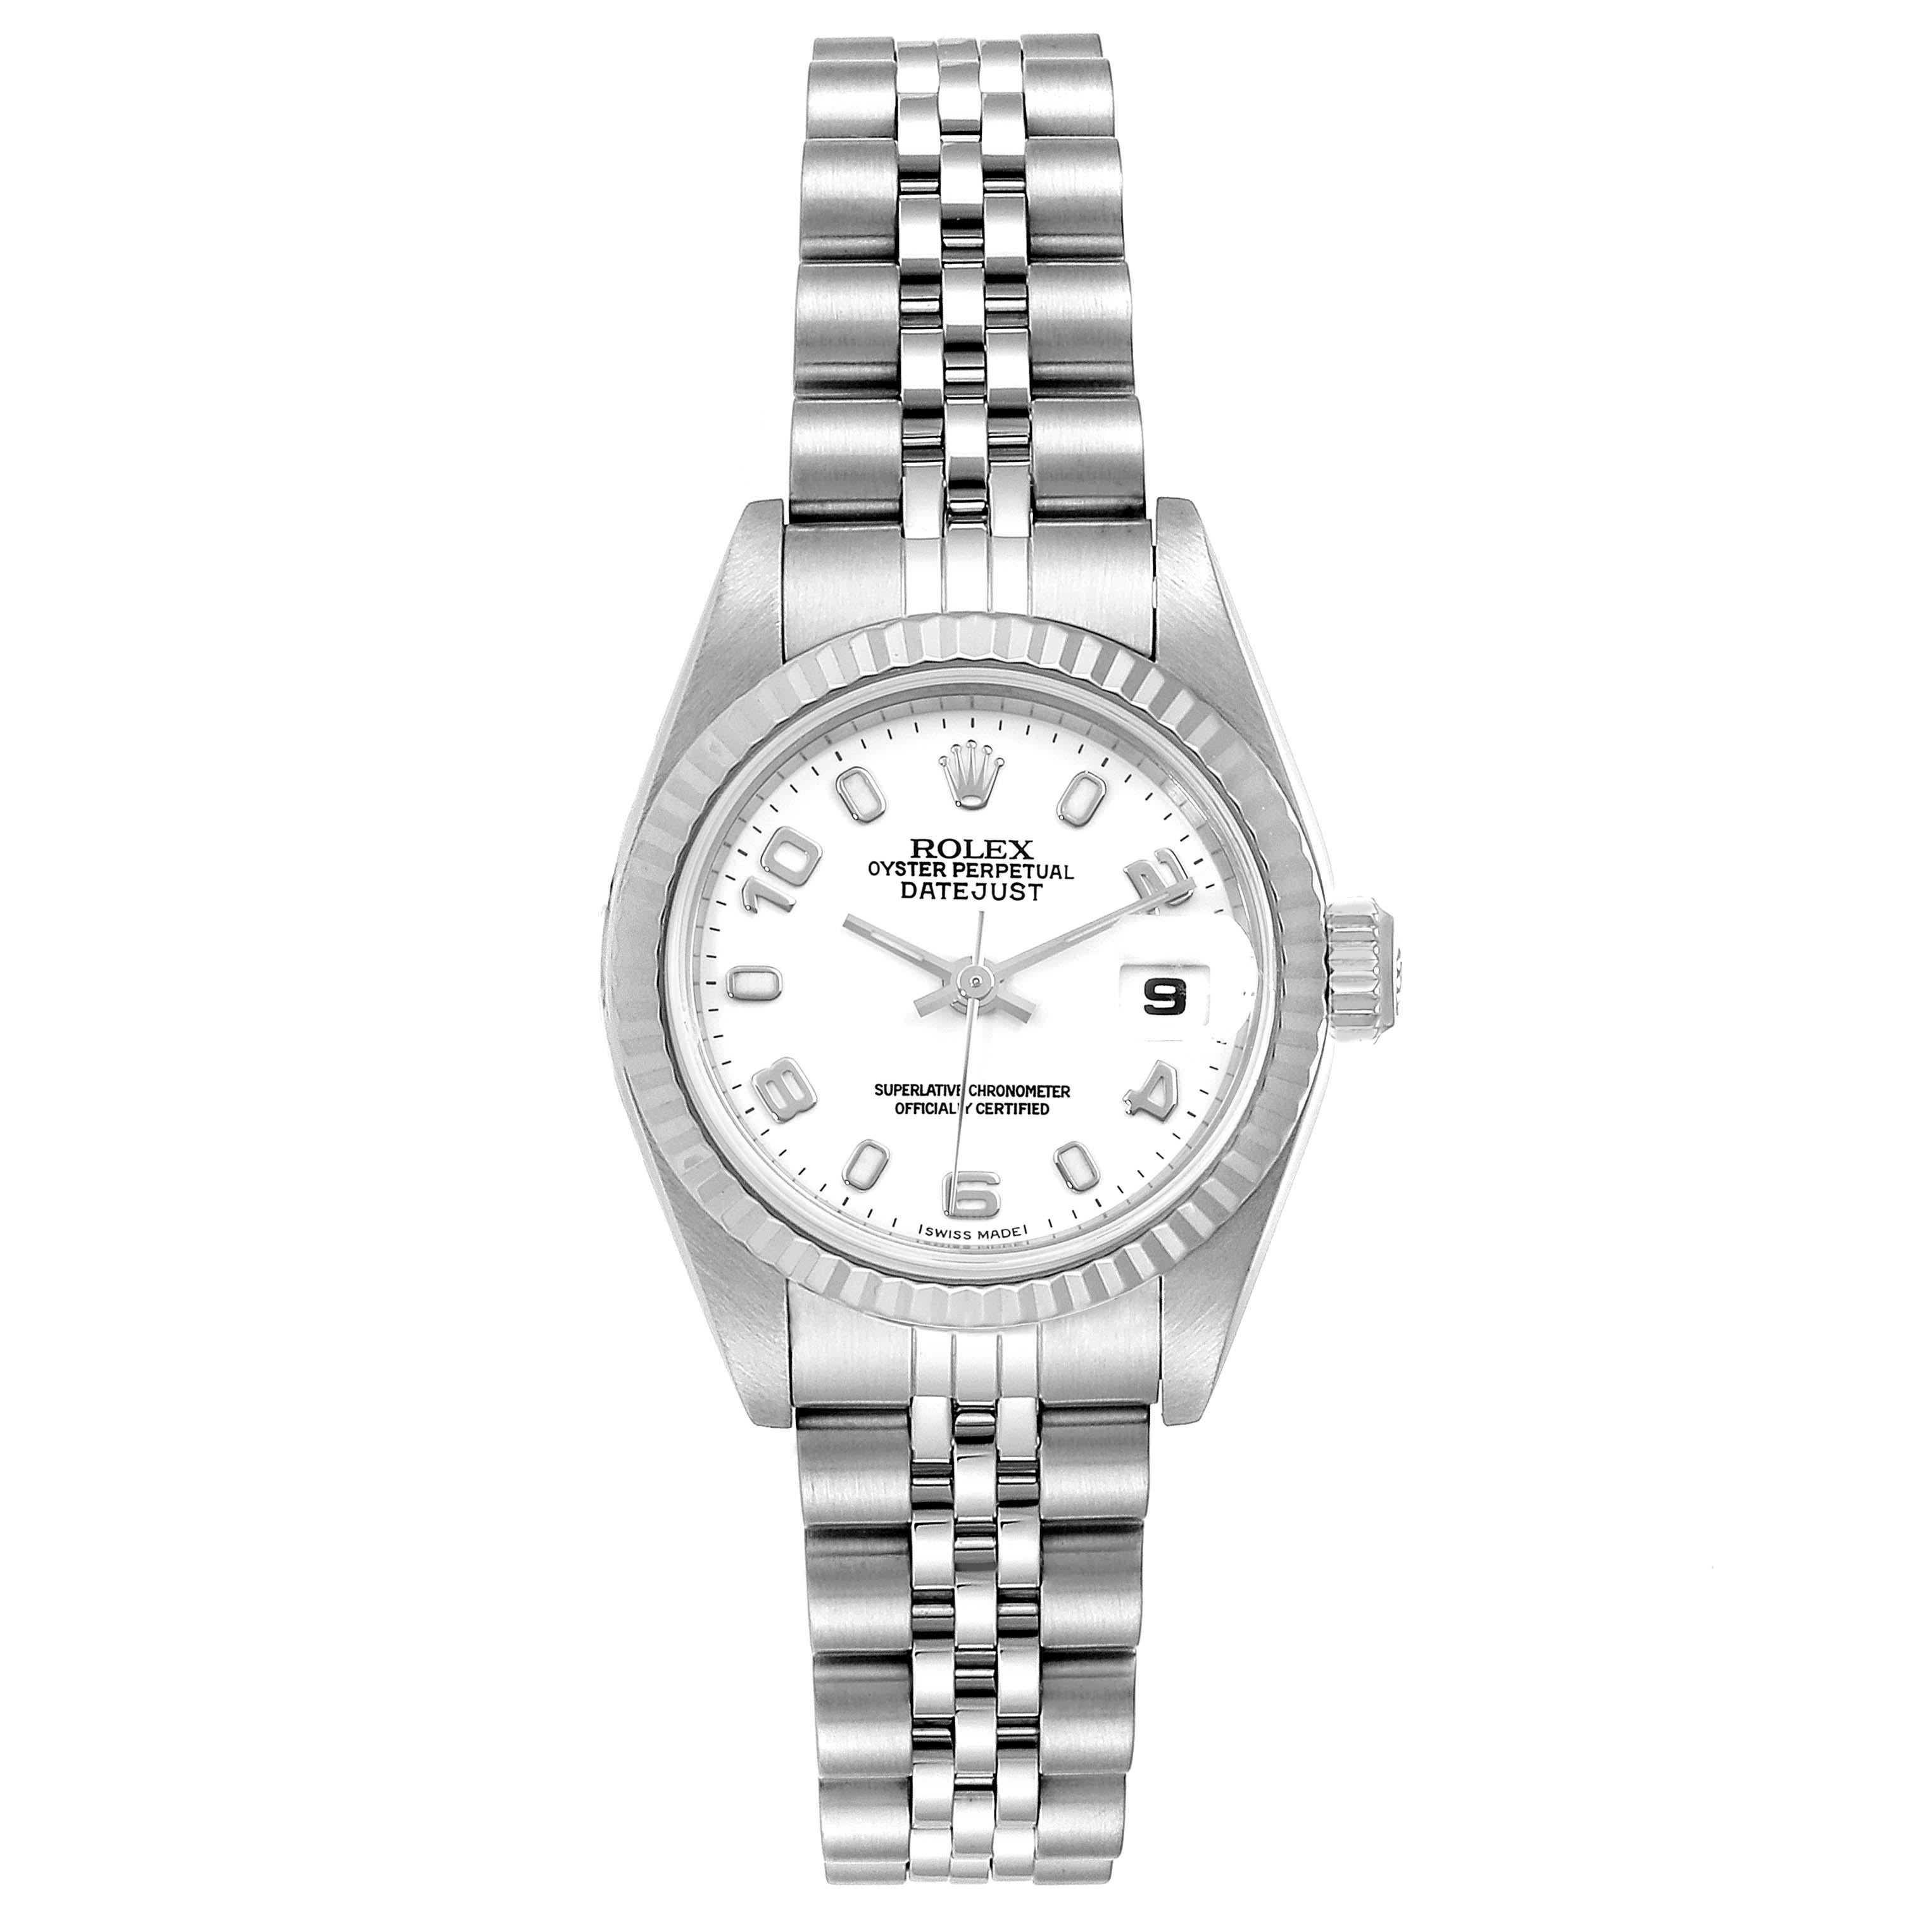 Rolex Datejust Ladies Steel 18k White Gold Watch 79174 Box Paper. Officially certified chronometer self-winding movement. Stainless steel oyster case 26.0 mm in diameter. Rolex logo on a crown. 18k white gold fluted bezel. Scratch resistant sapphire